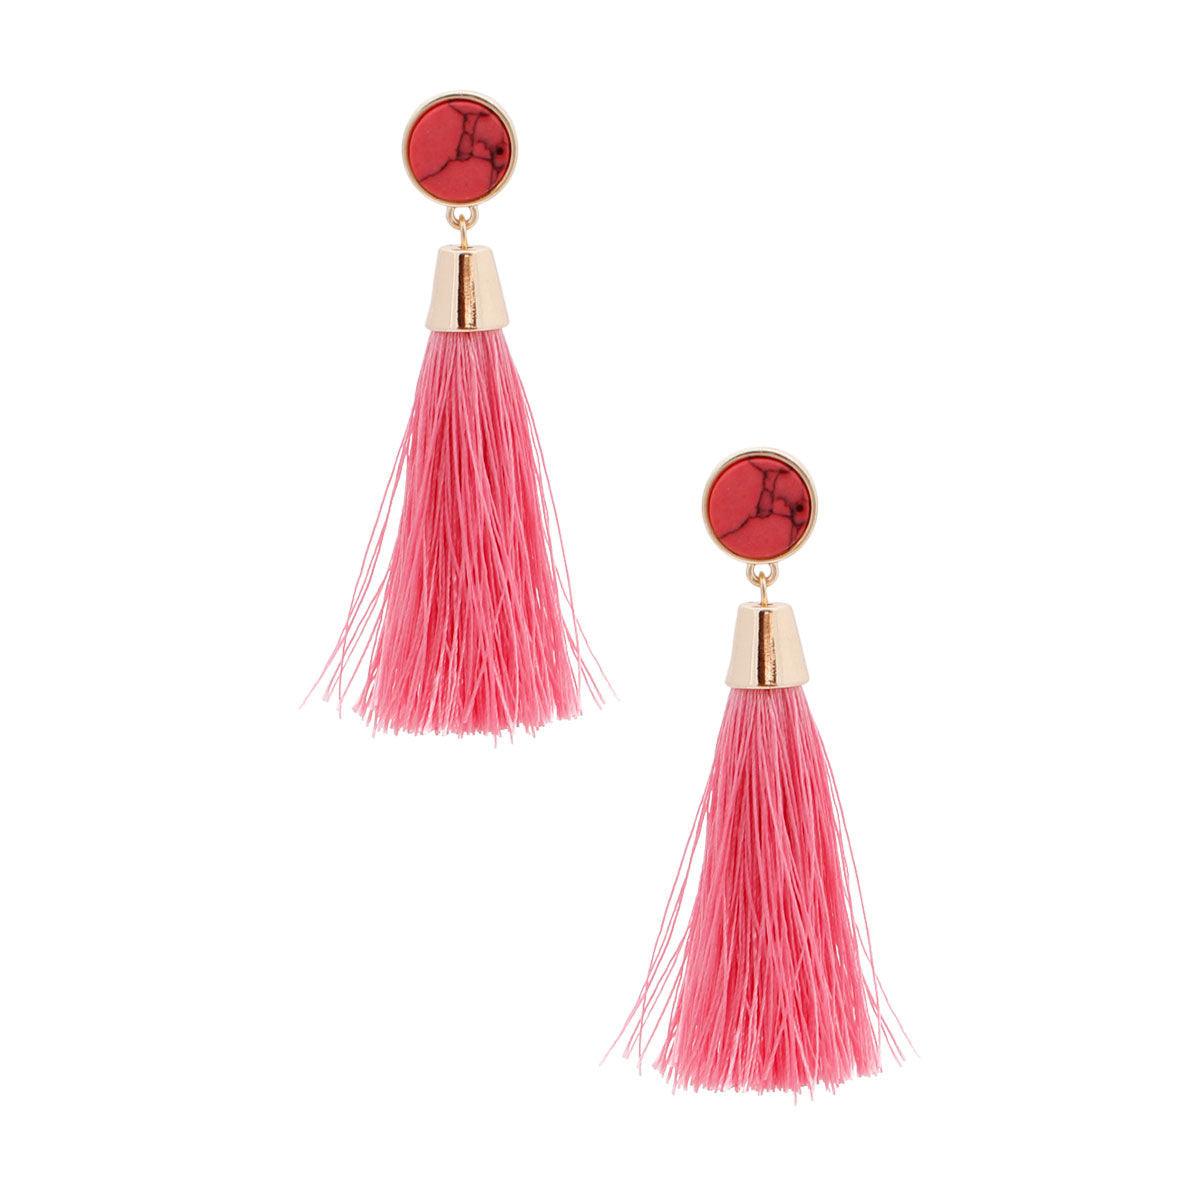 Trendy Women's Tassel Earrings - Perfect Pink Accessory for Every Outfit!